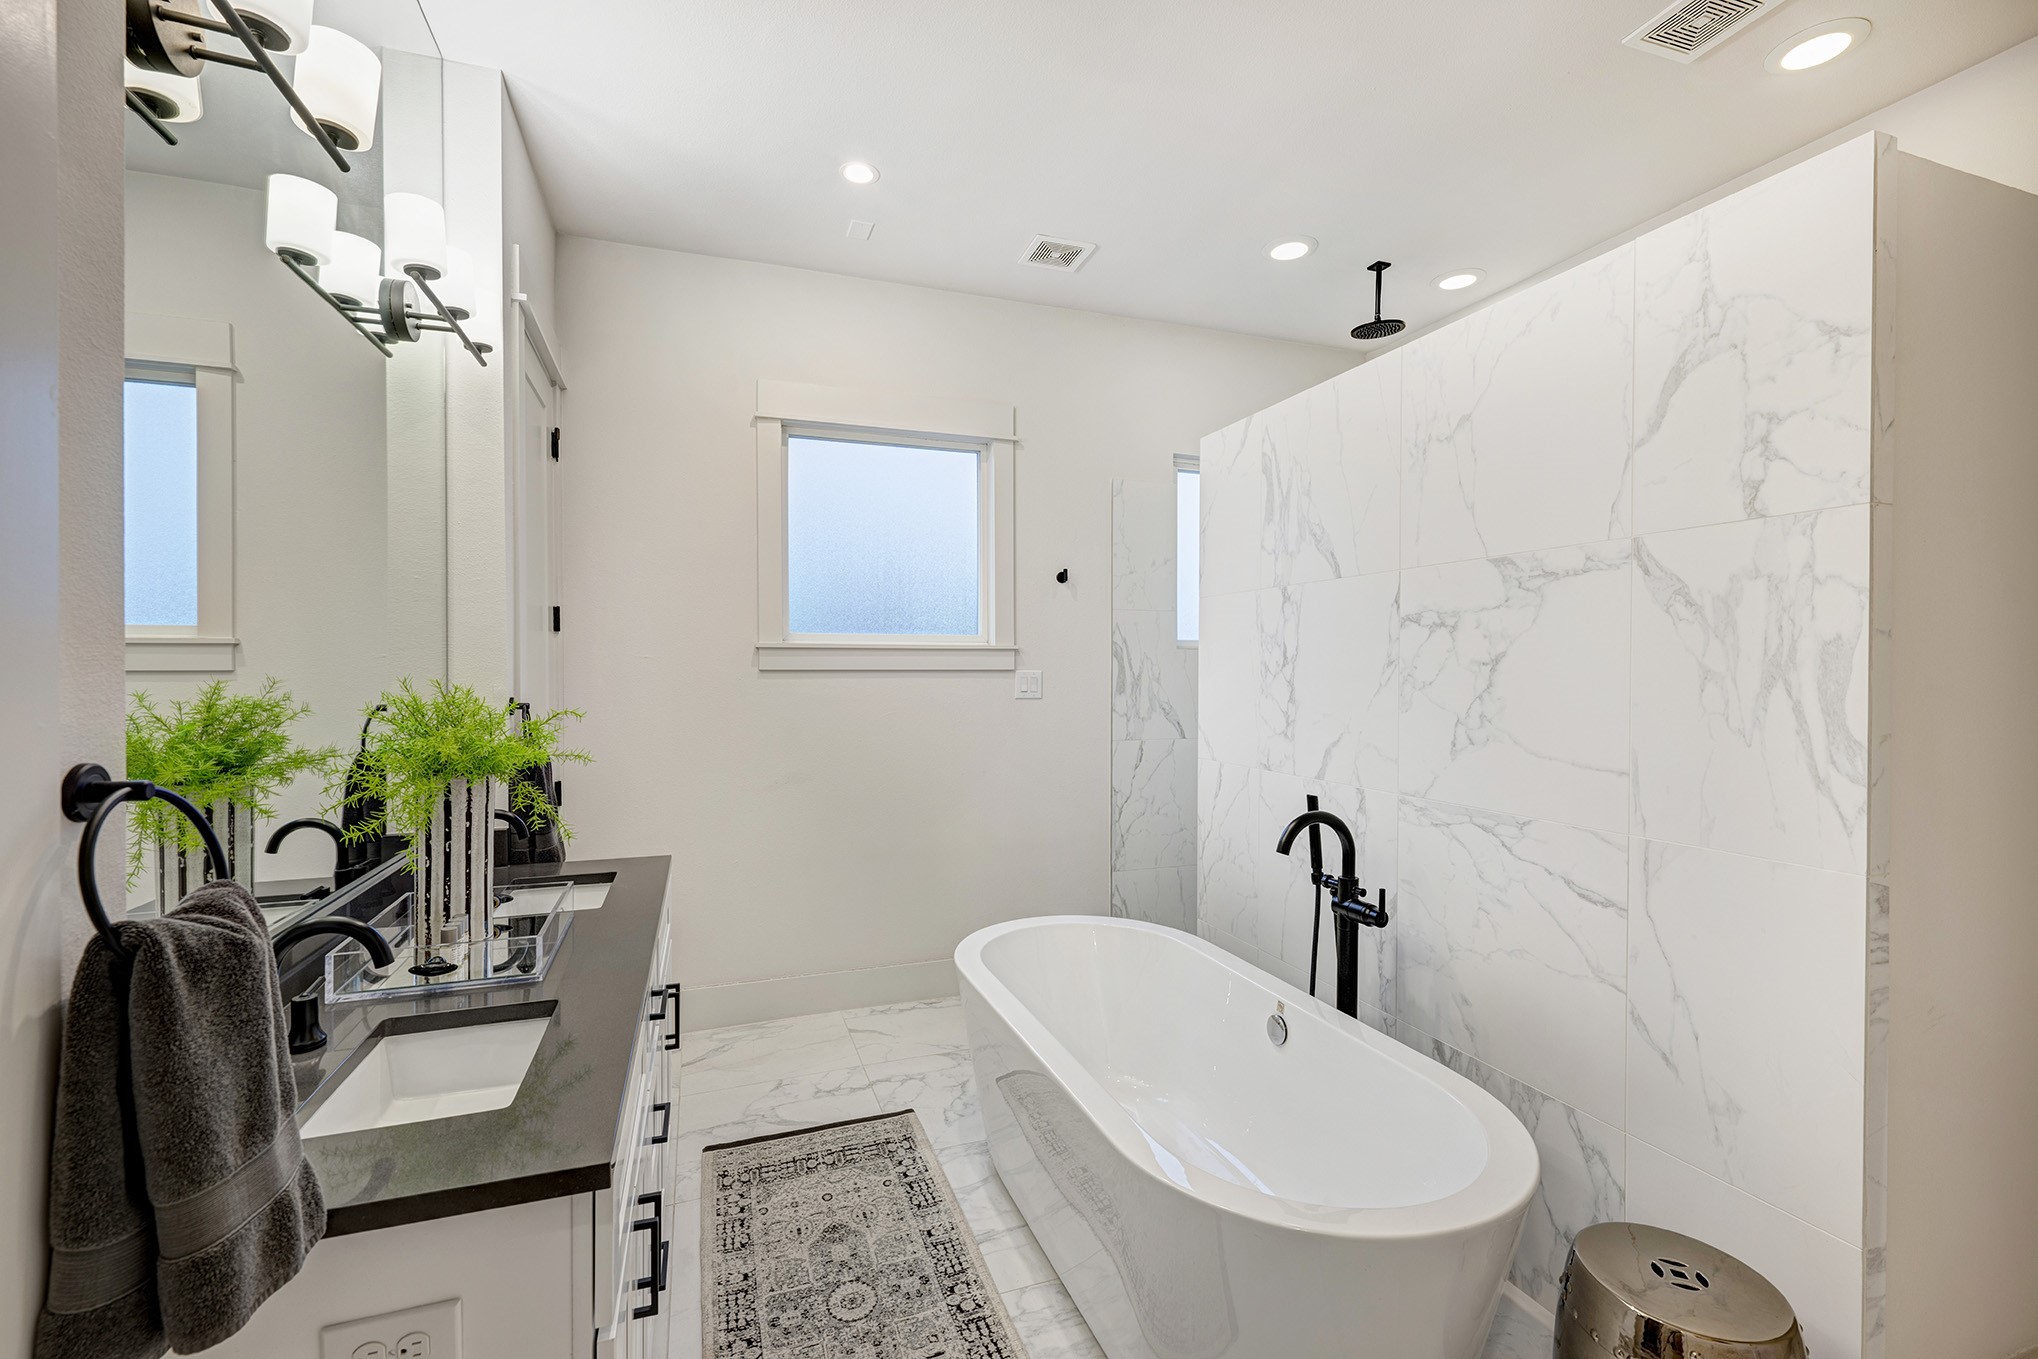 Luxurious primary bathroom has a spa-like feel with quartz counter, double sinks, freestanding soaking tub and linen closet.